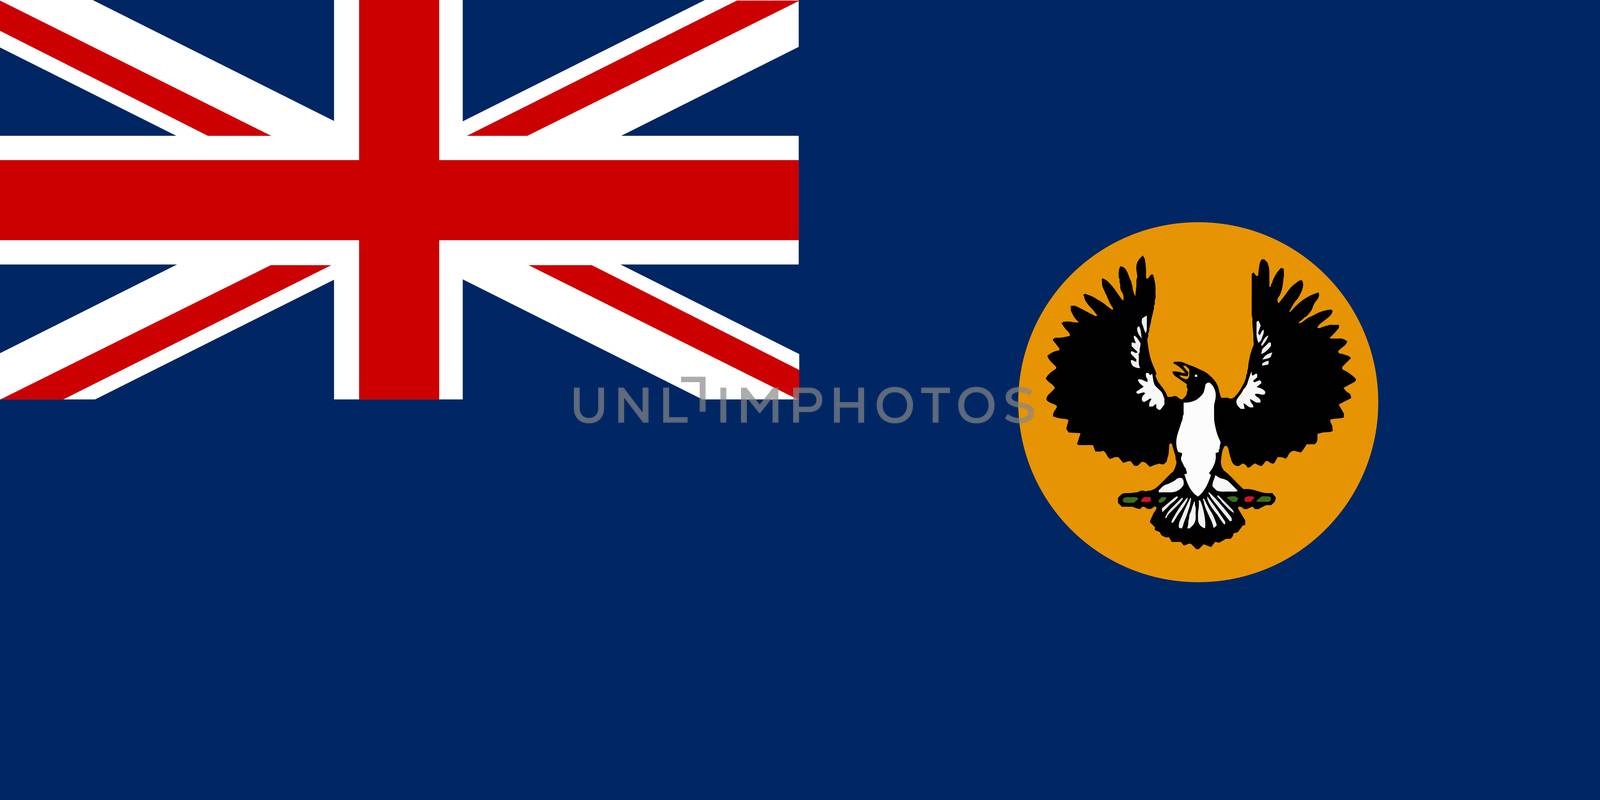 The flag of the Australian state of South Australia